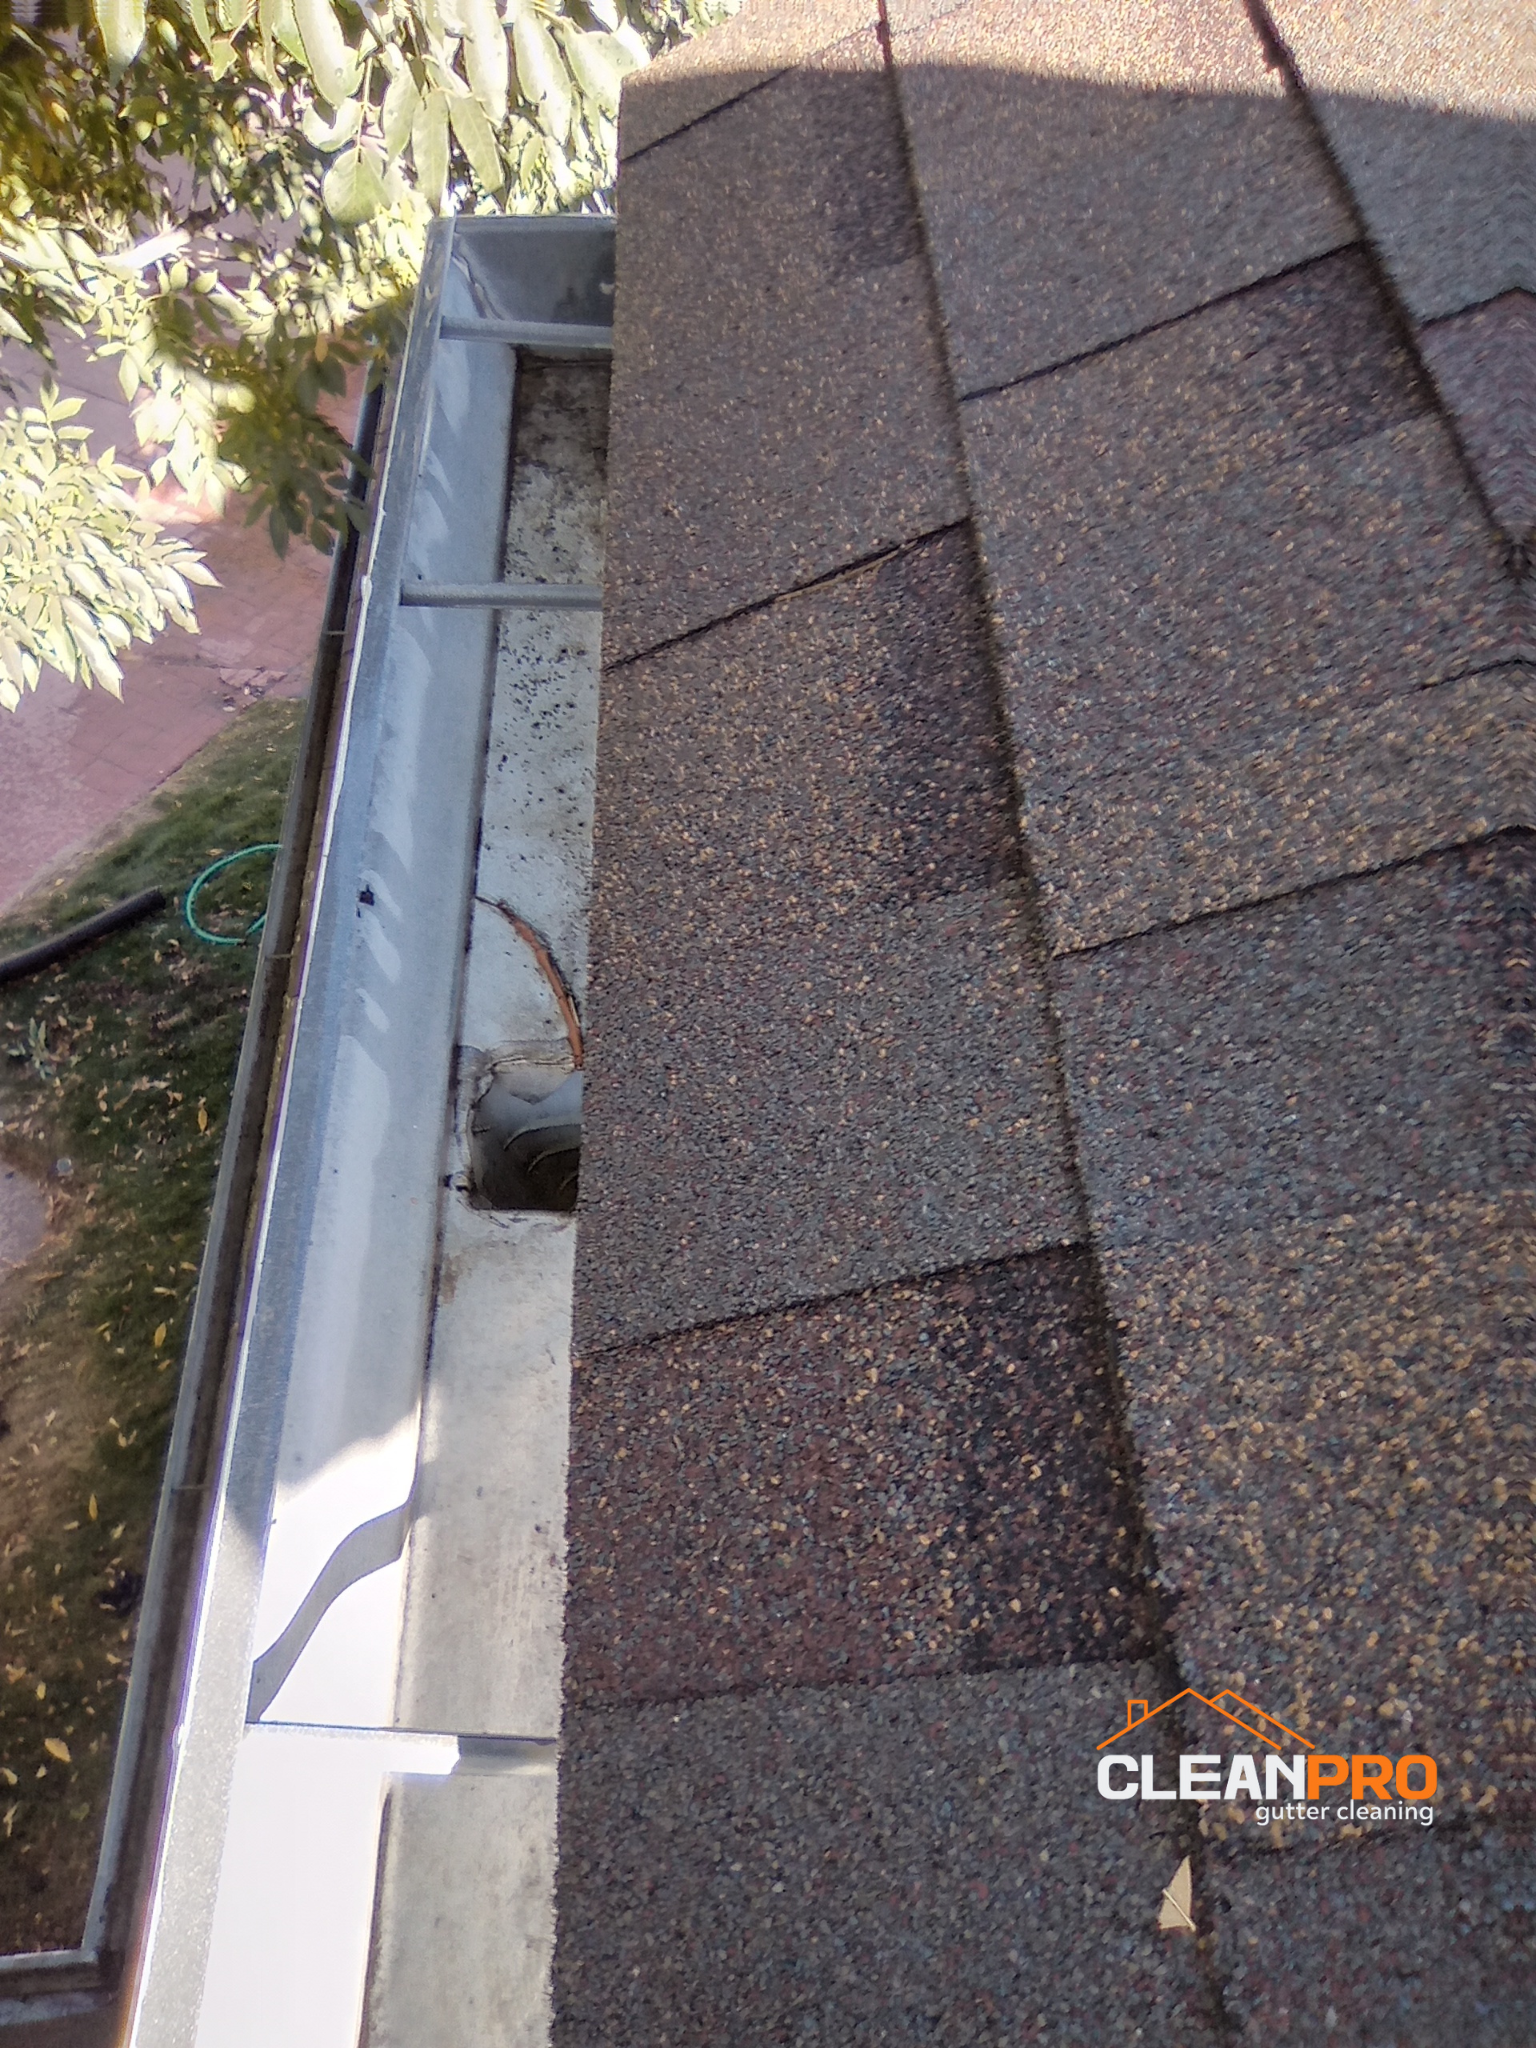 Local Gutter Cleaning in Colorado Springs